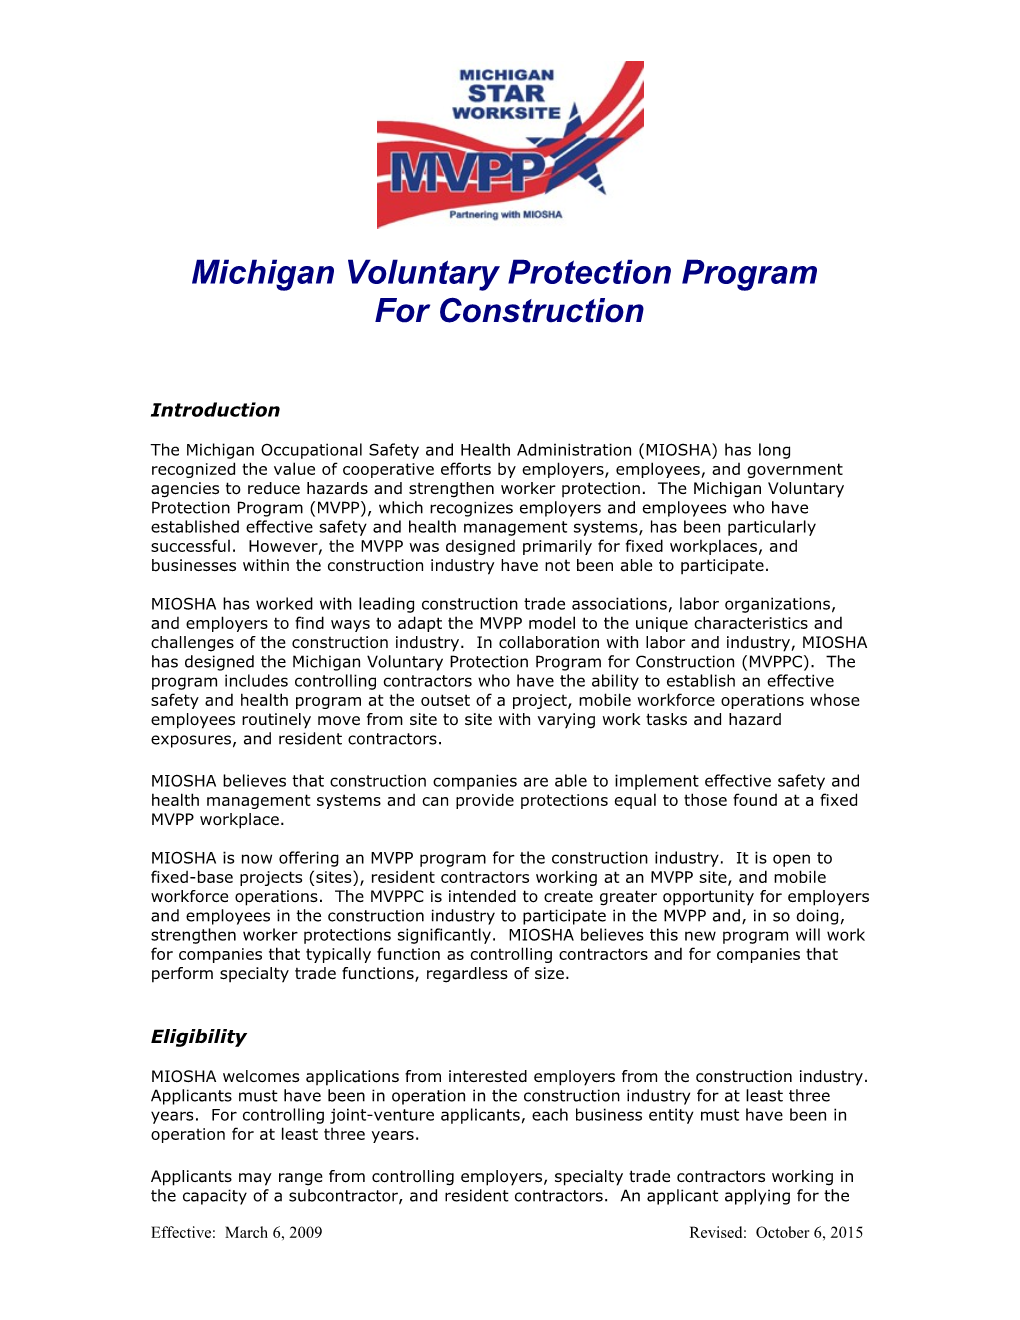 Michigan Voluntary Protection Program for Construction